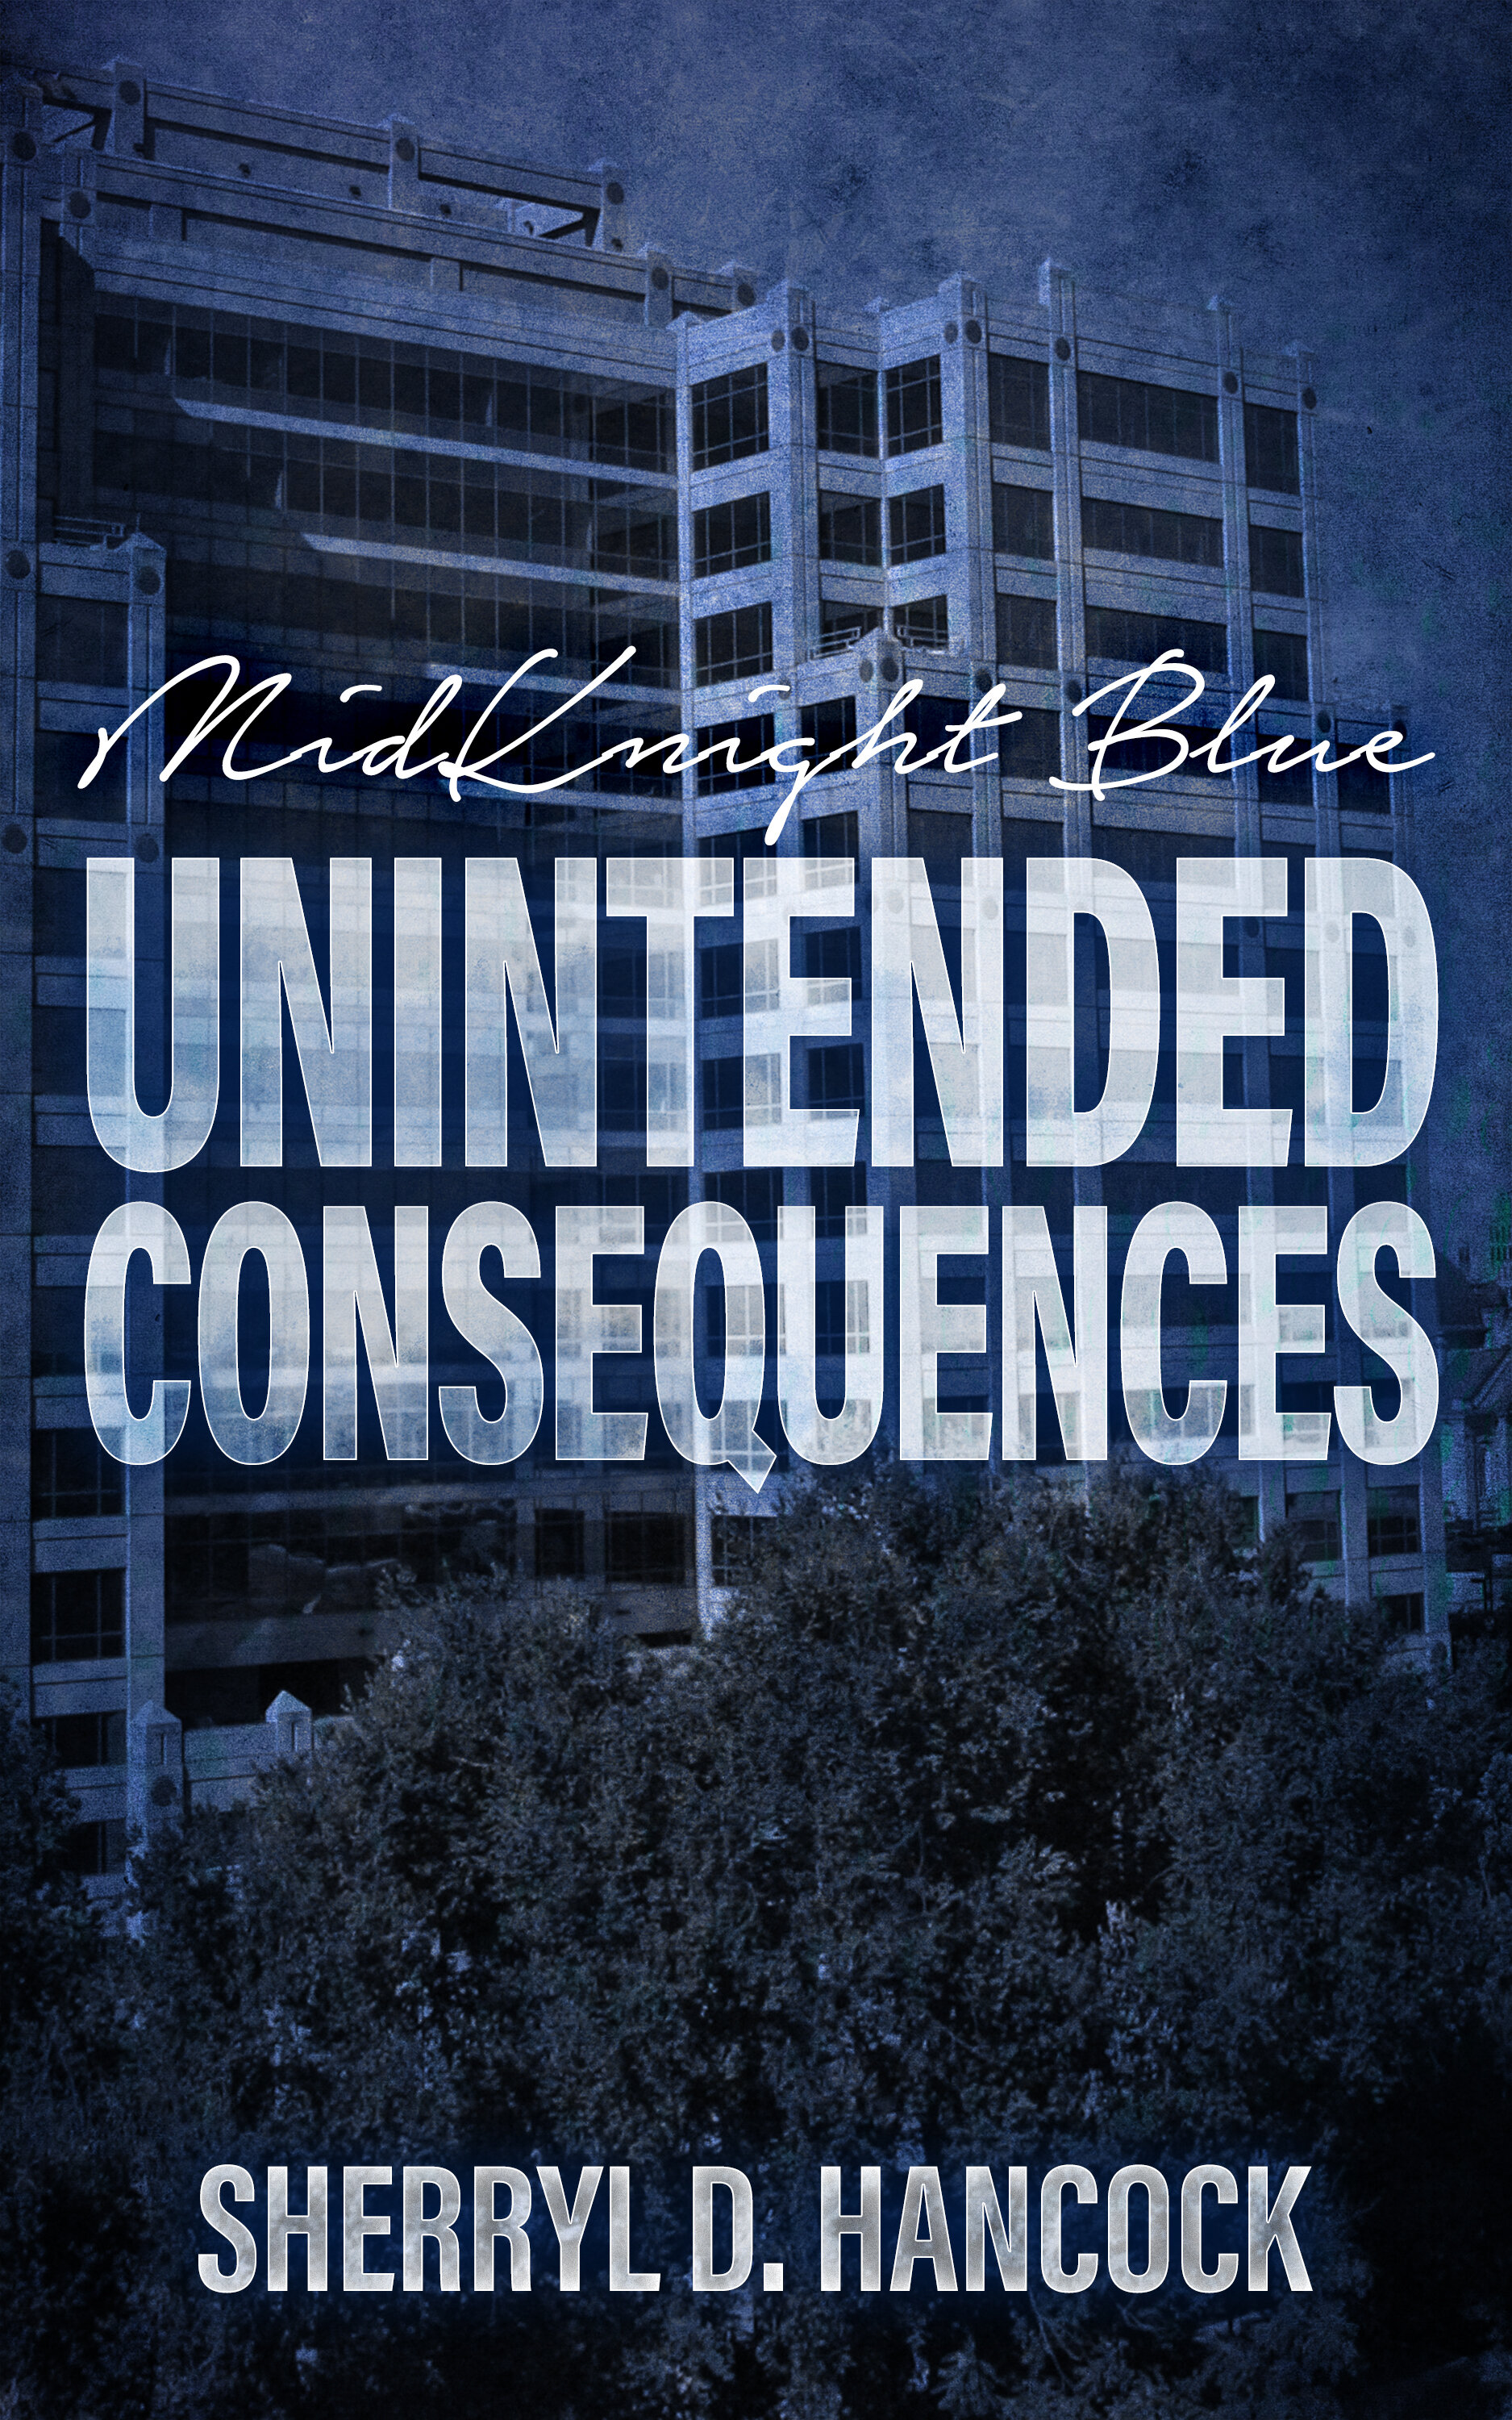 MidKnight Blue - 15 - Unintended Consequences - Ebook.jpg